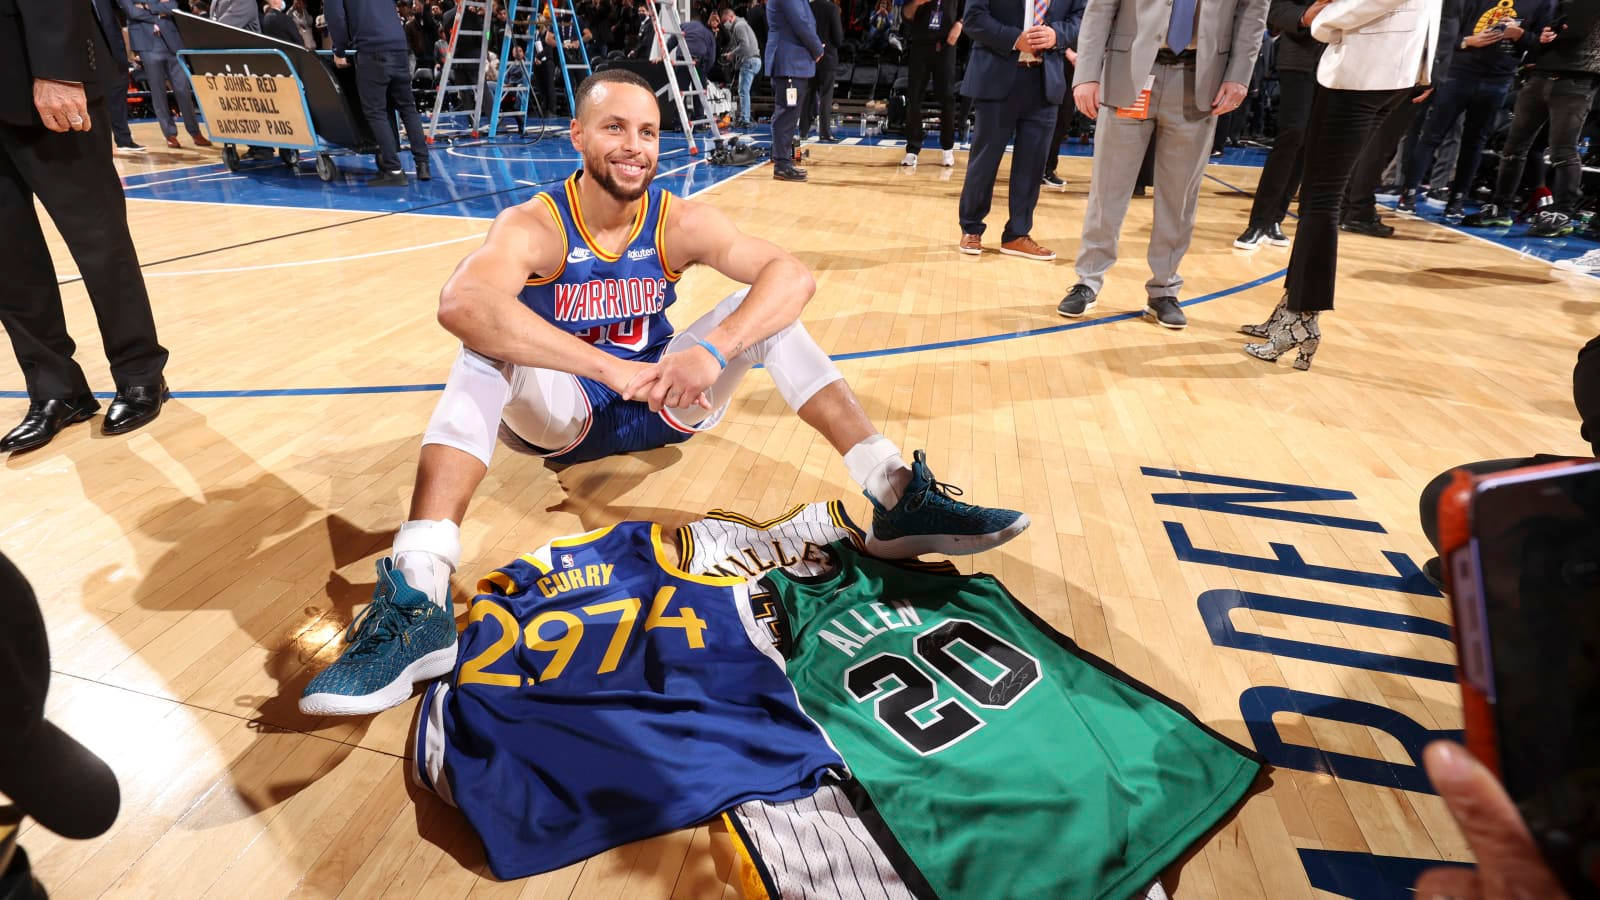 Steph Curry On The Floor With Jerseys Background